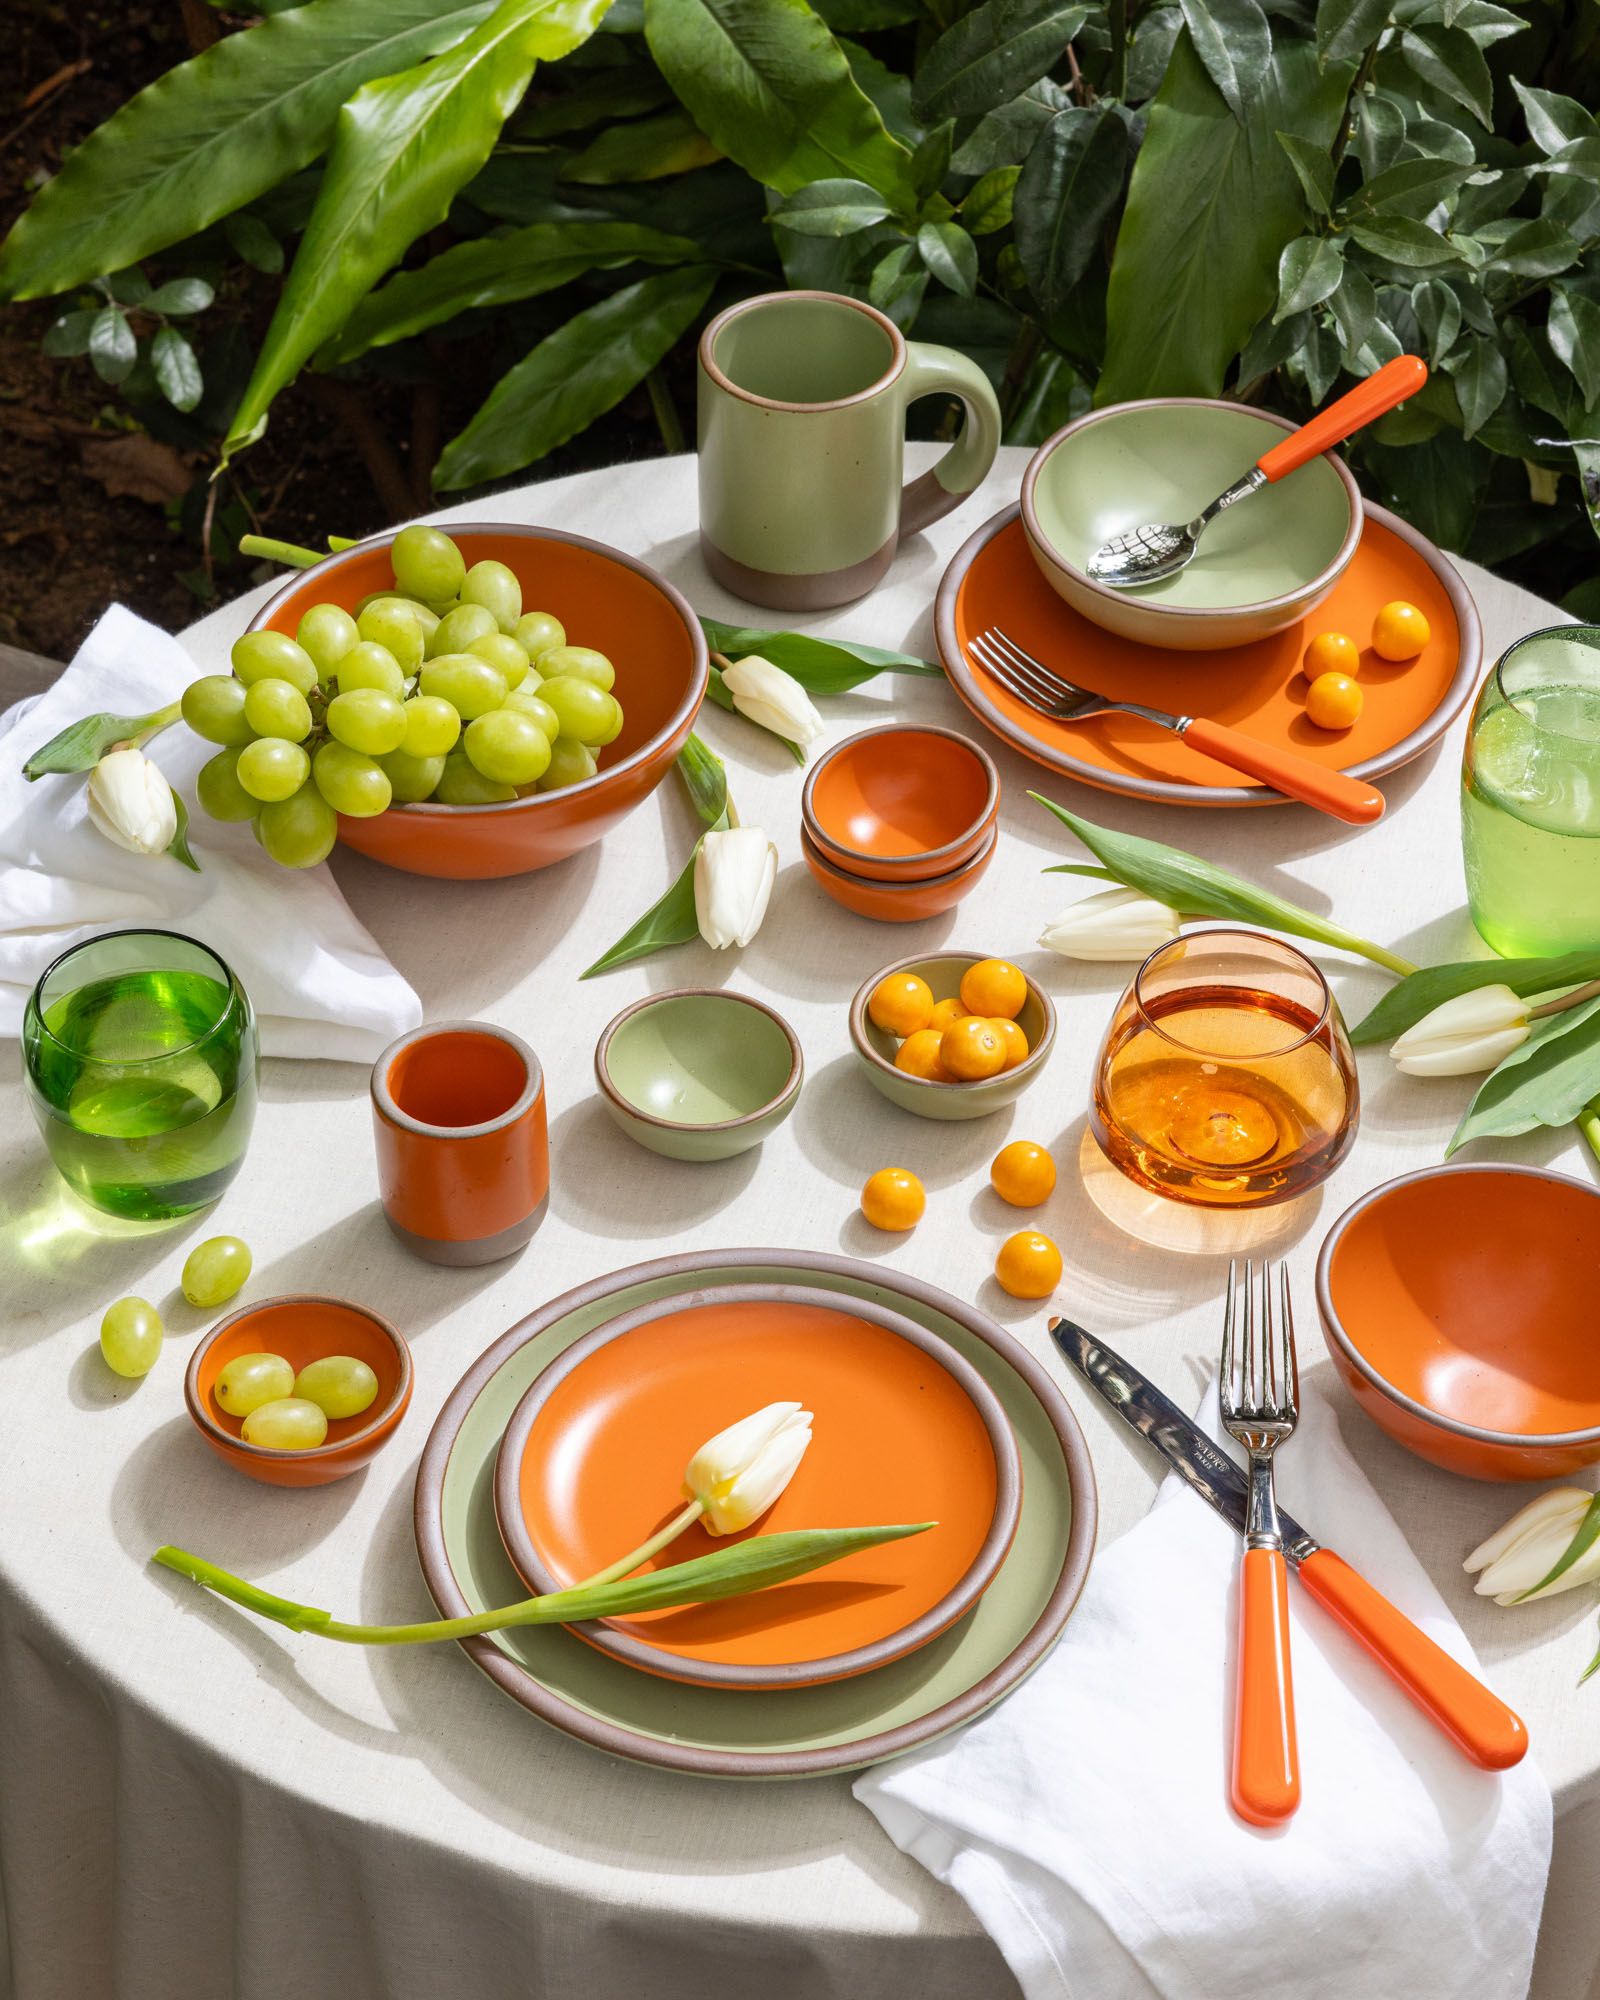 In an outdoor setting, a table is covered in ceramic dinnerware in a bold orange and calming sage green colors, surrounded by glasses, flatware and flowers in the same color palette.